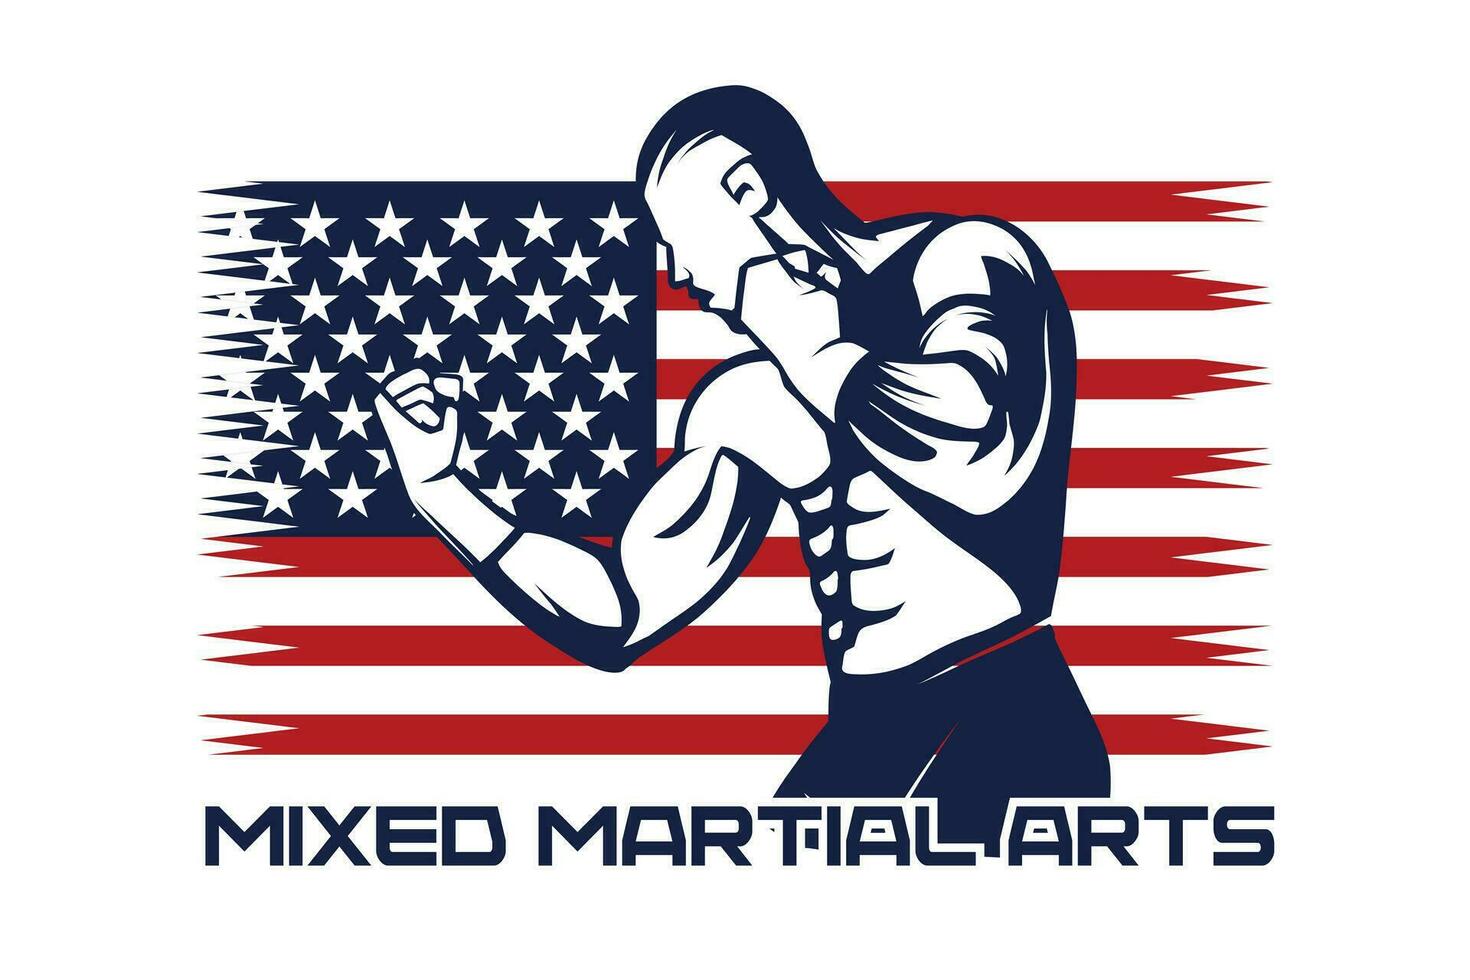 MMA fighter illustration with flag background vector